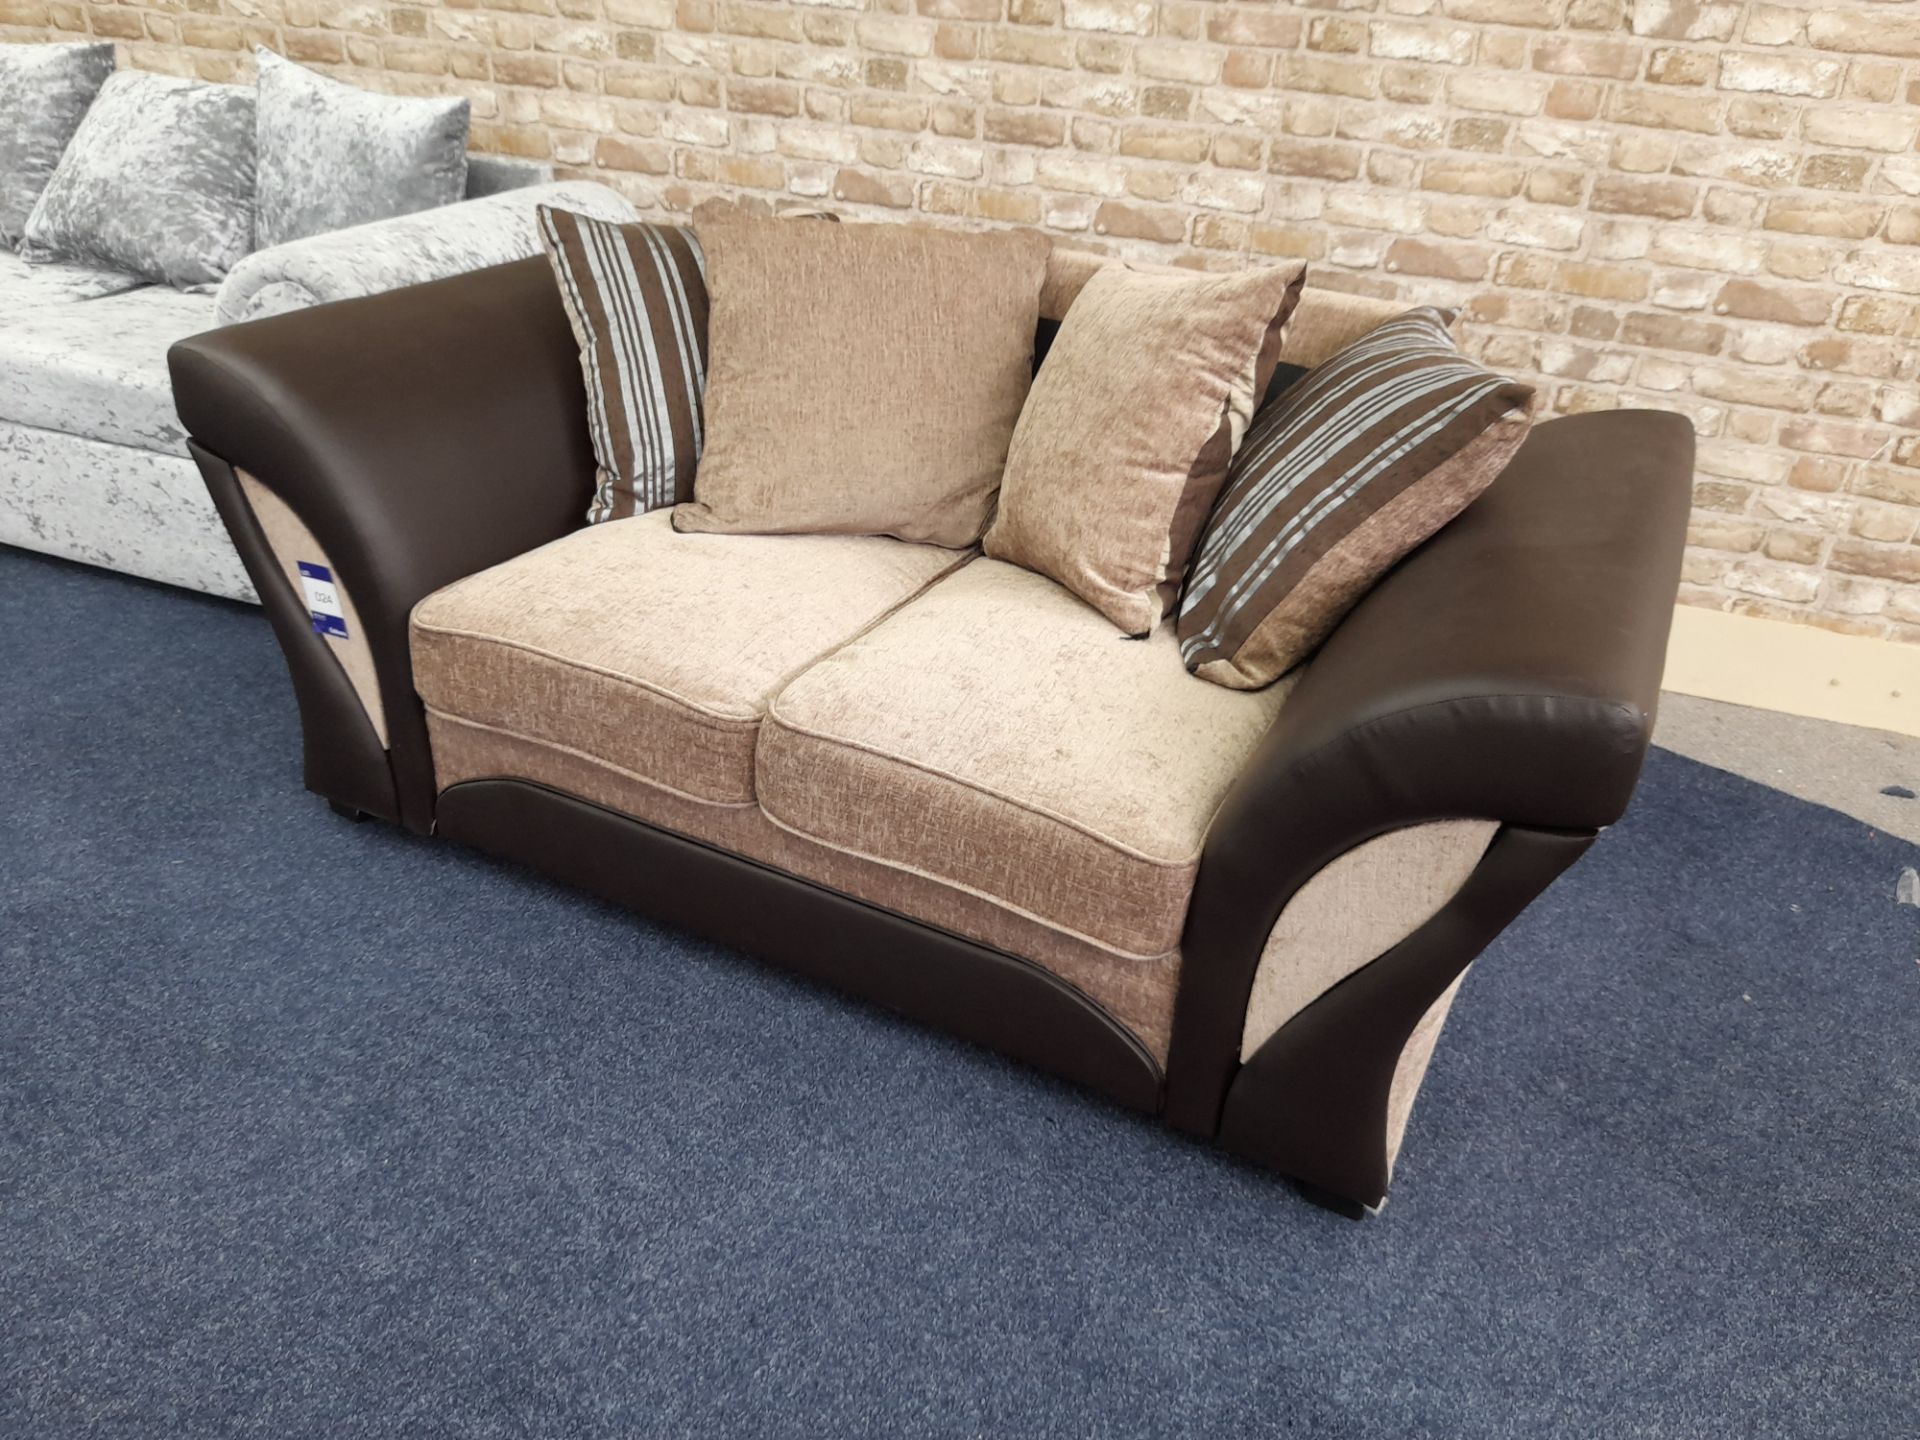 Brown Leather/light brown fabric upholstered, 2 seater, scatter cushioned back sofa (Ex-Display) - Image 2 of 5